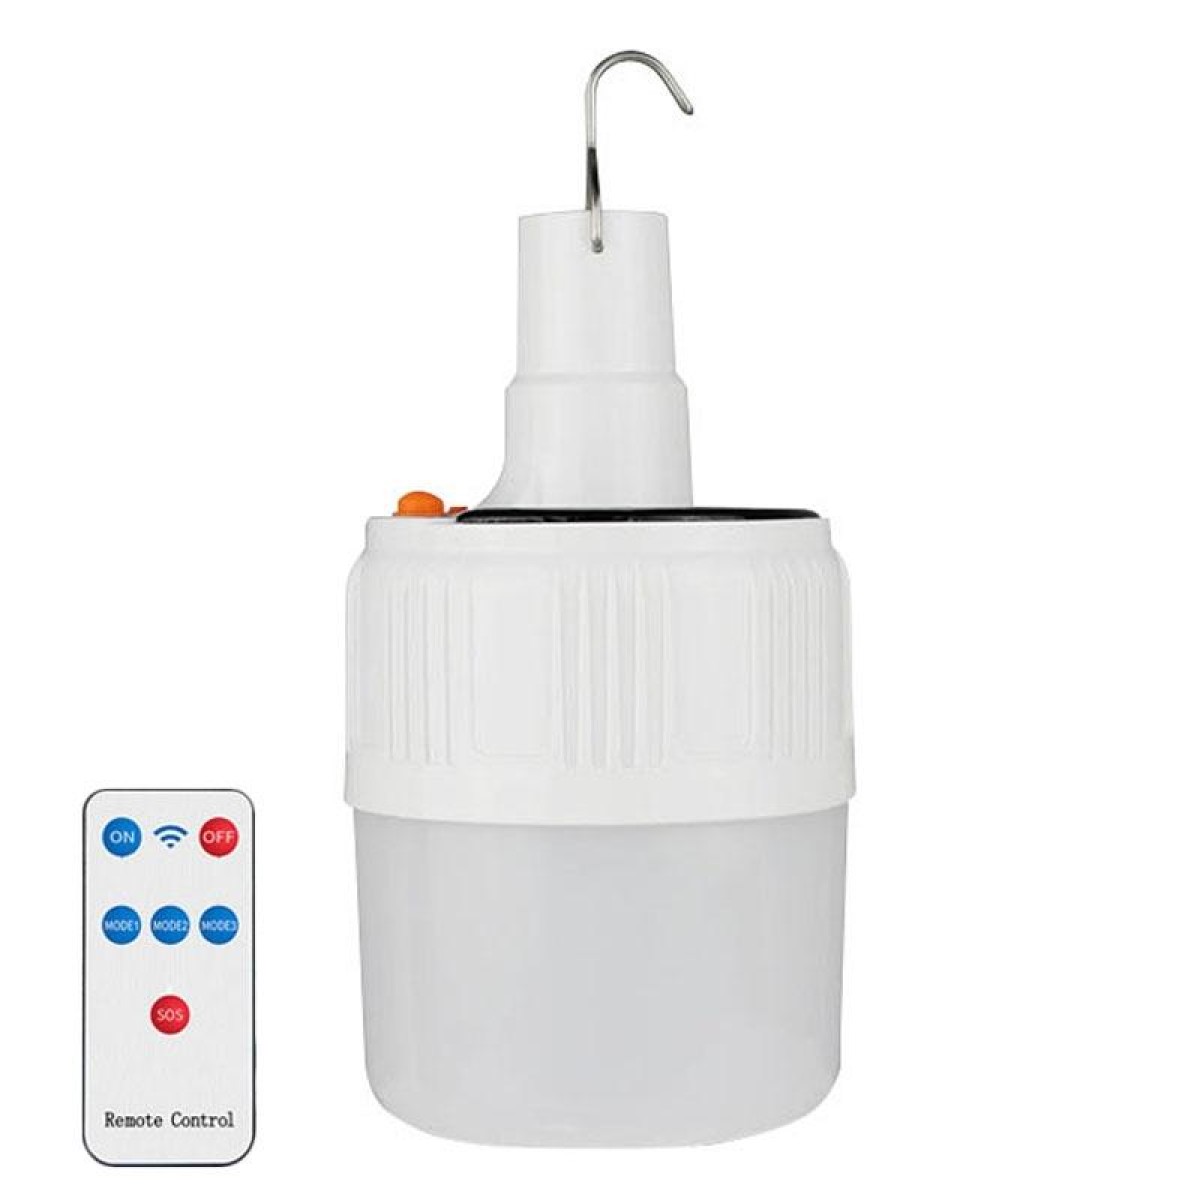 Rechargeable LED Solar Bulb Light Waterproof Night Market Stall Energy Saving Lamp, Model: 24LED Remote Control